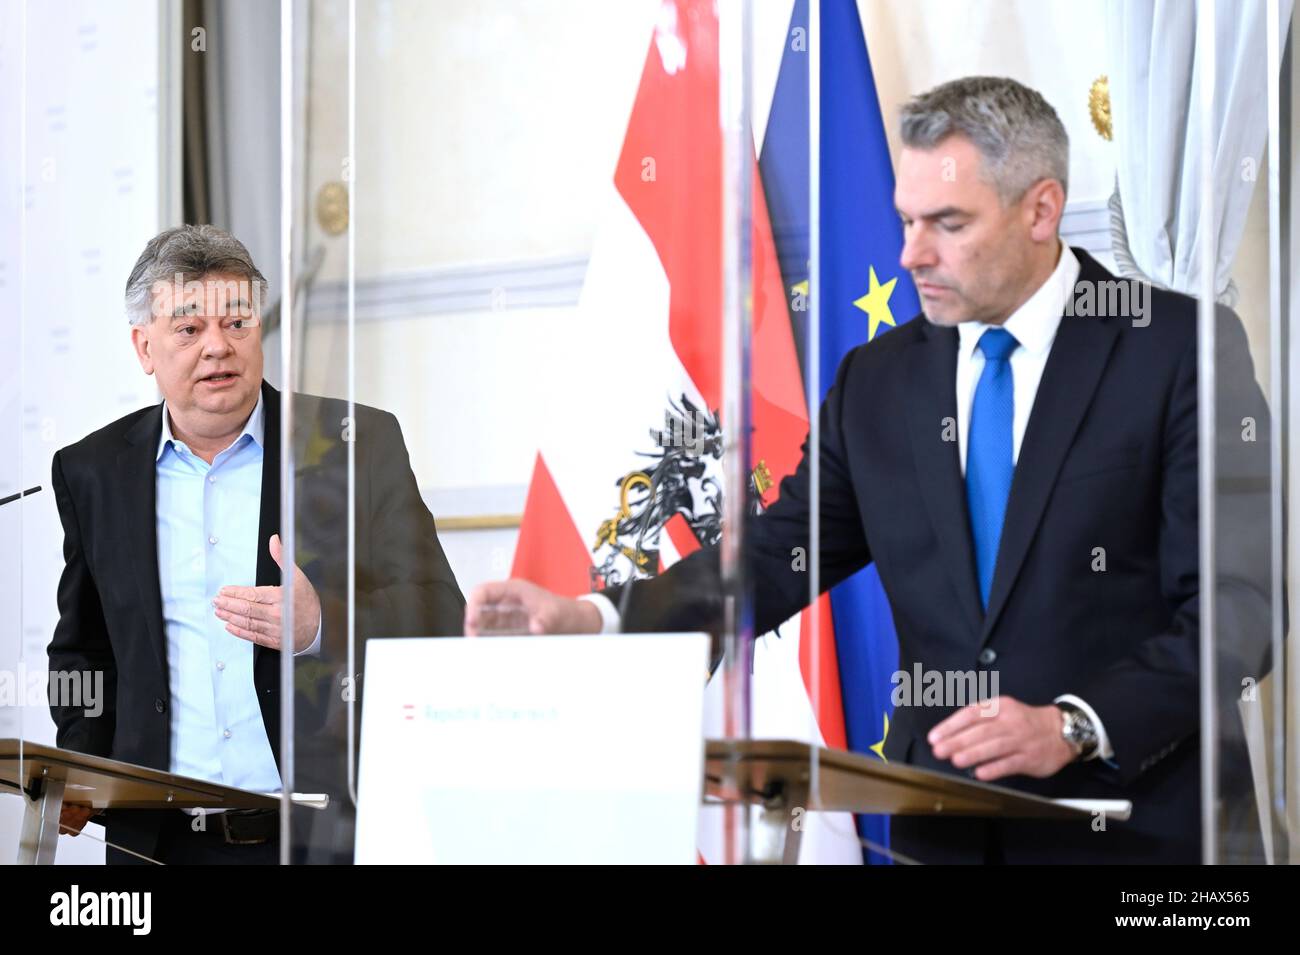 Vienna, Austria. 15th Dec, 2021. Council of Ministers in the Federal Chancellery with Vice Chancellor Werner Kogler (L) and Federal Chancellor Karl Nehammer (R) Stock Photo